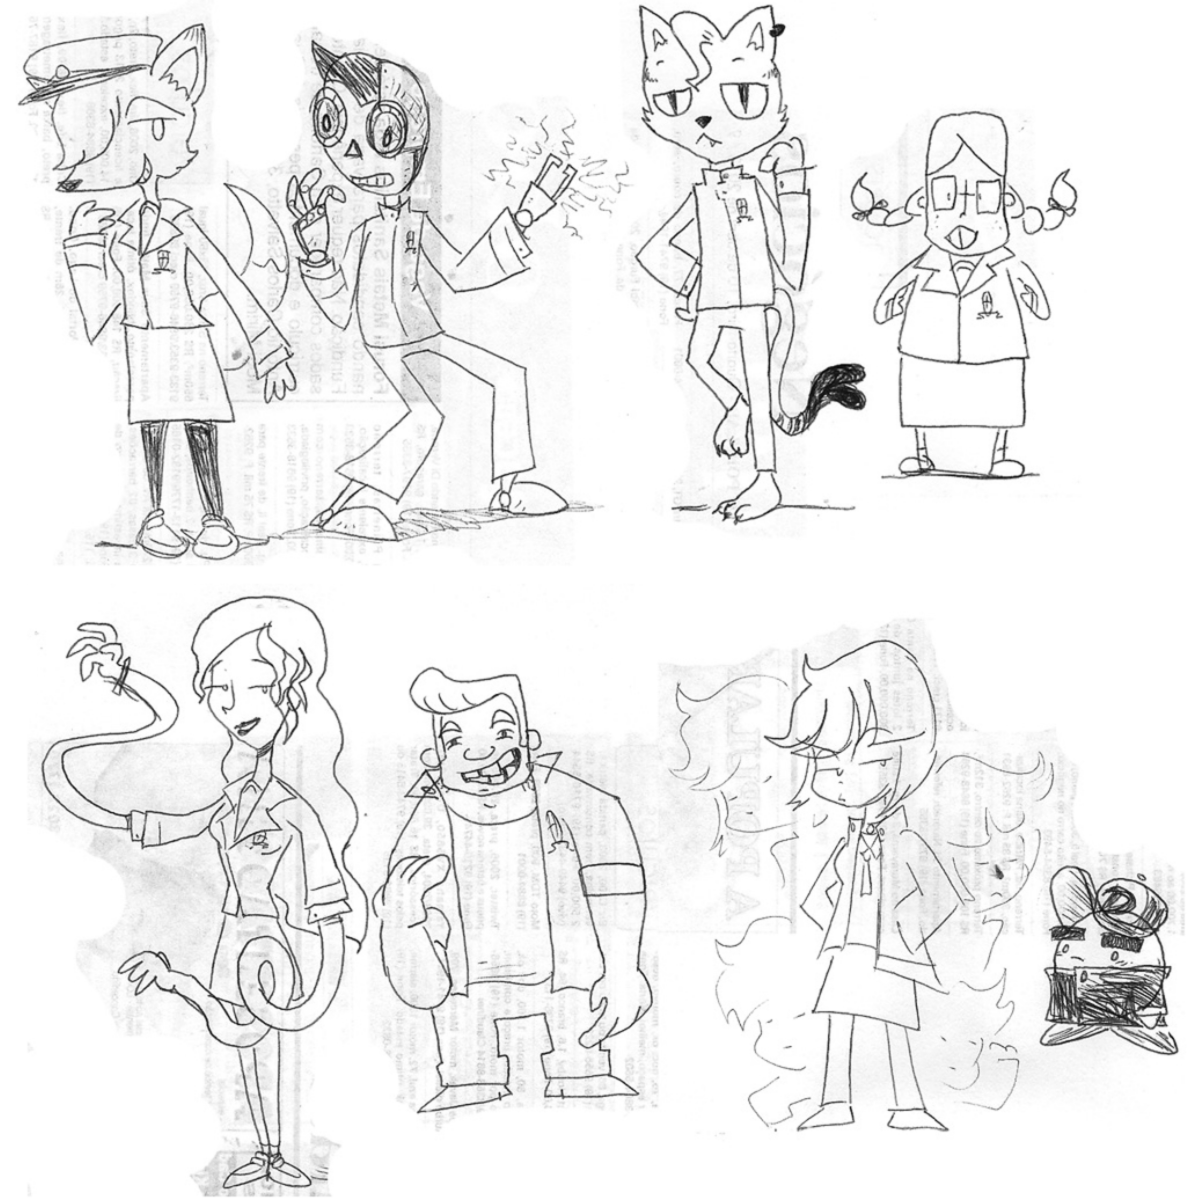 06. Describe your character creation process

Based on a vague concept/role for the char, I start to flesh them out as i'm drawing them. to illustrate this here's a group of students i came up with (2013). i got a good sense of their personalities from these initial sketches 